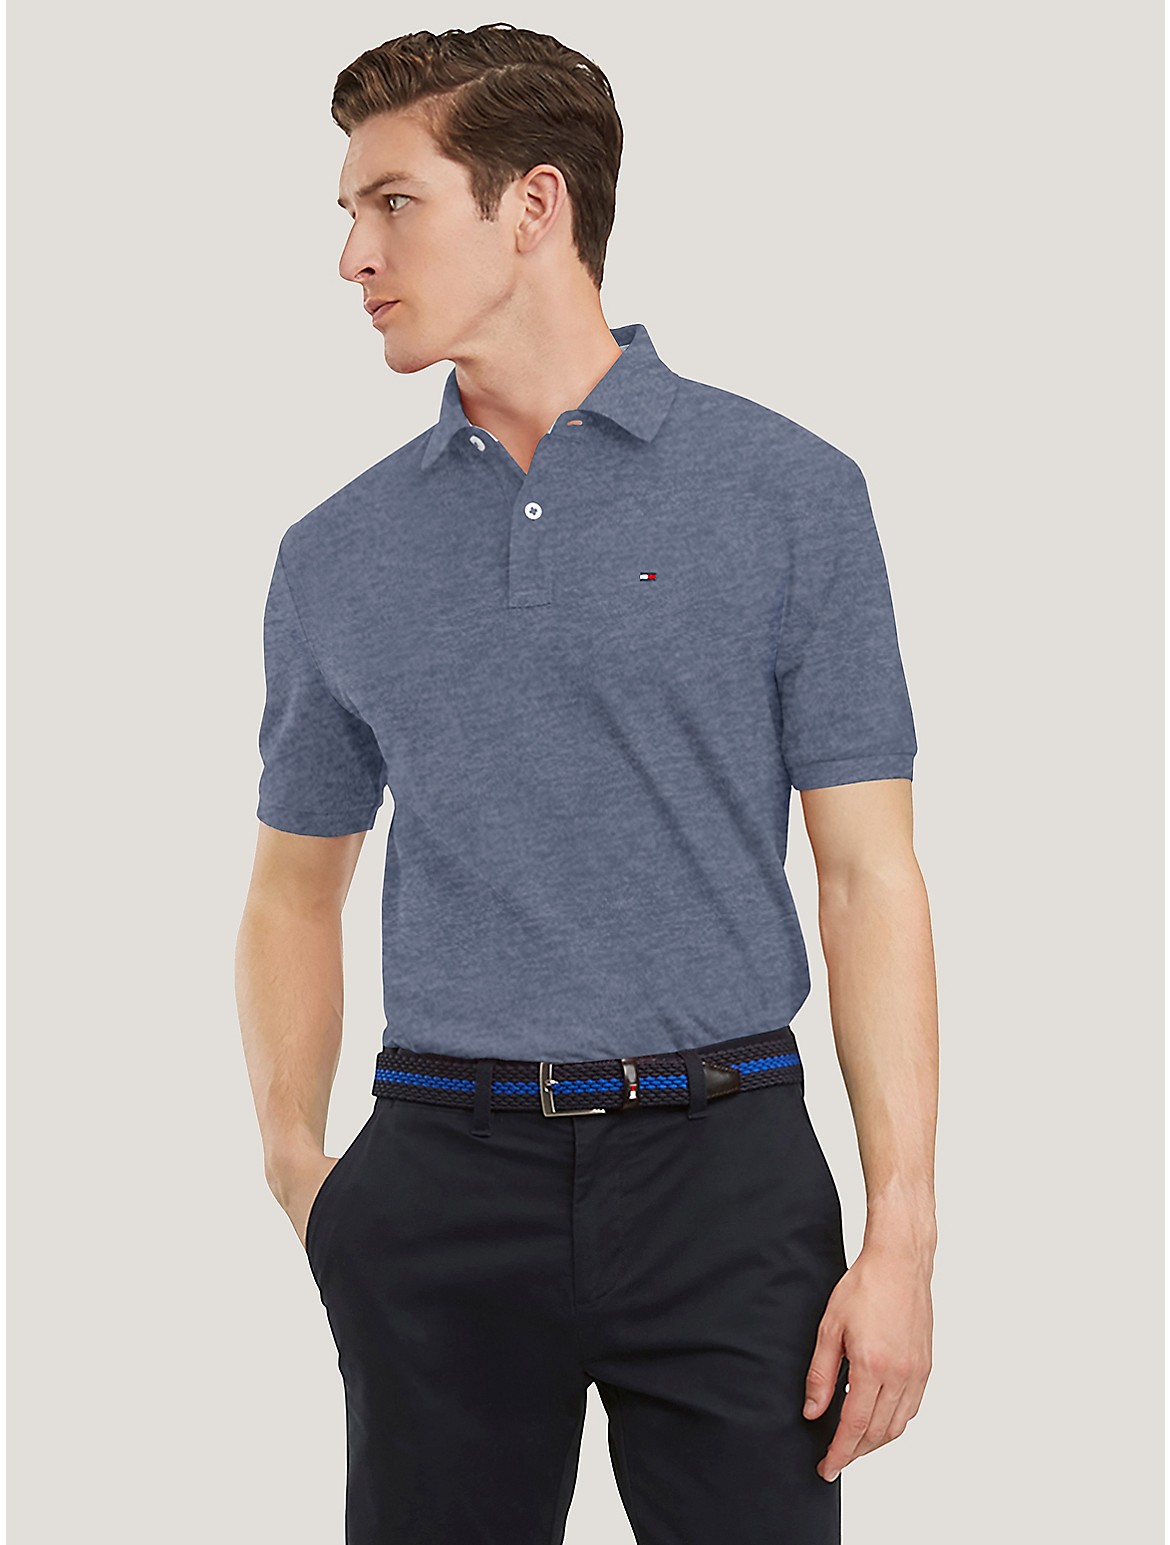 Tommy Hilfiger Classic Fit Pique Polo In Medium Blue Heather